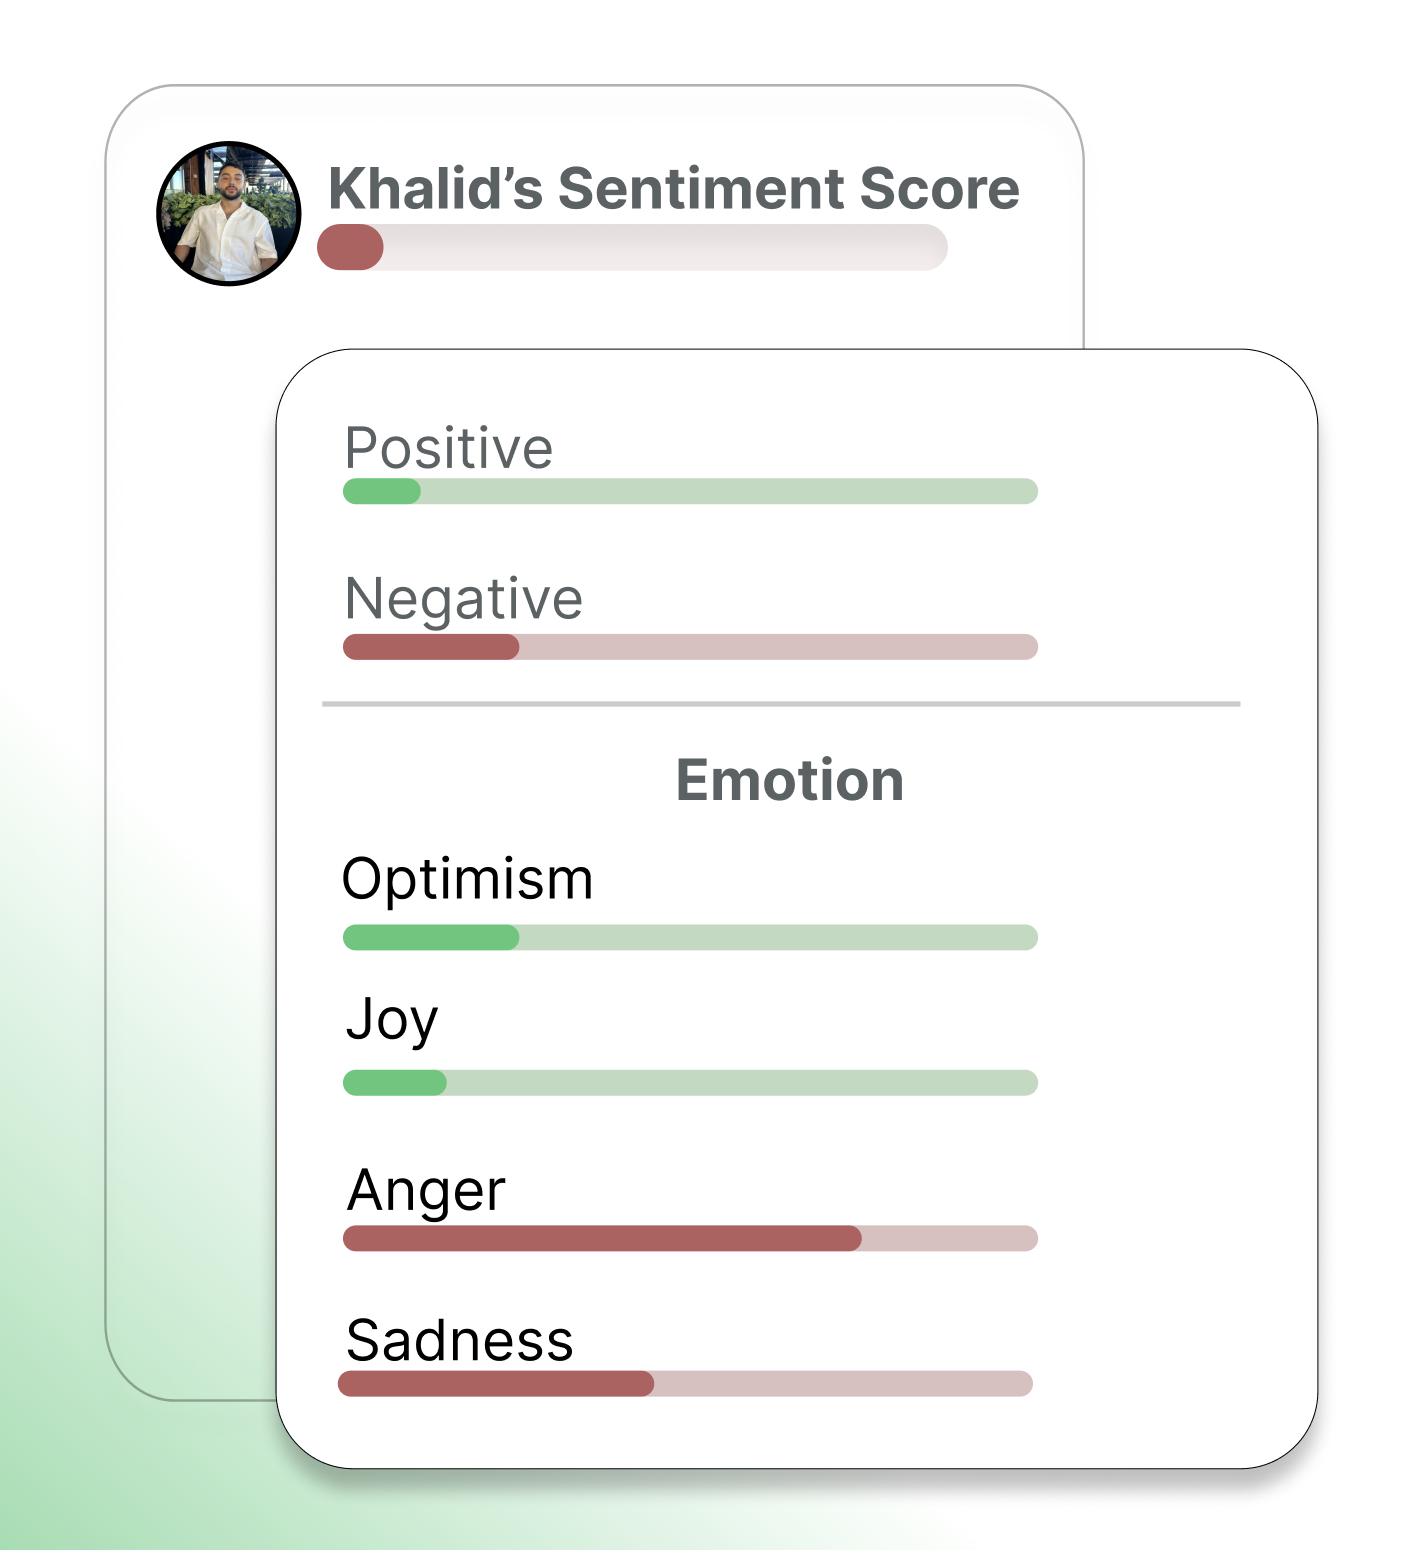 CommuniFlow Advanced Sentiment Analysis 🚀 - tune into your team's emotional undercurrent using AI. Our sentiment analysis translates moods into data, ensuring you're ahead of the curve in team satisfaction and conflict resolution.